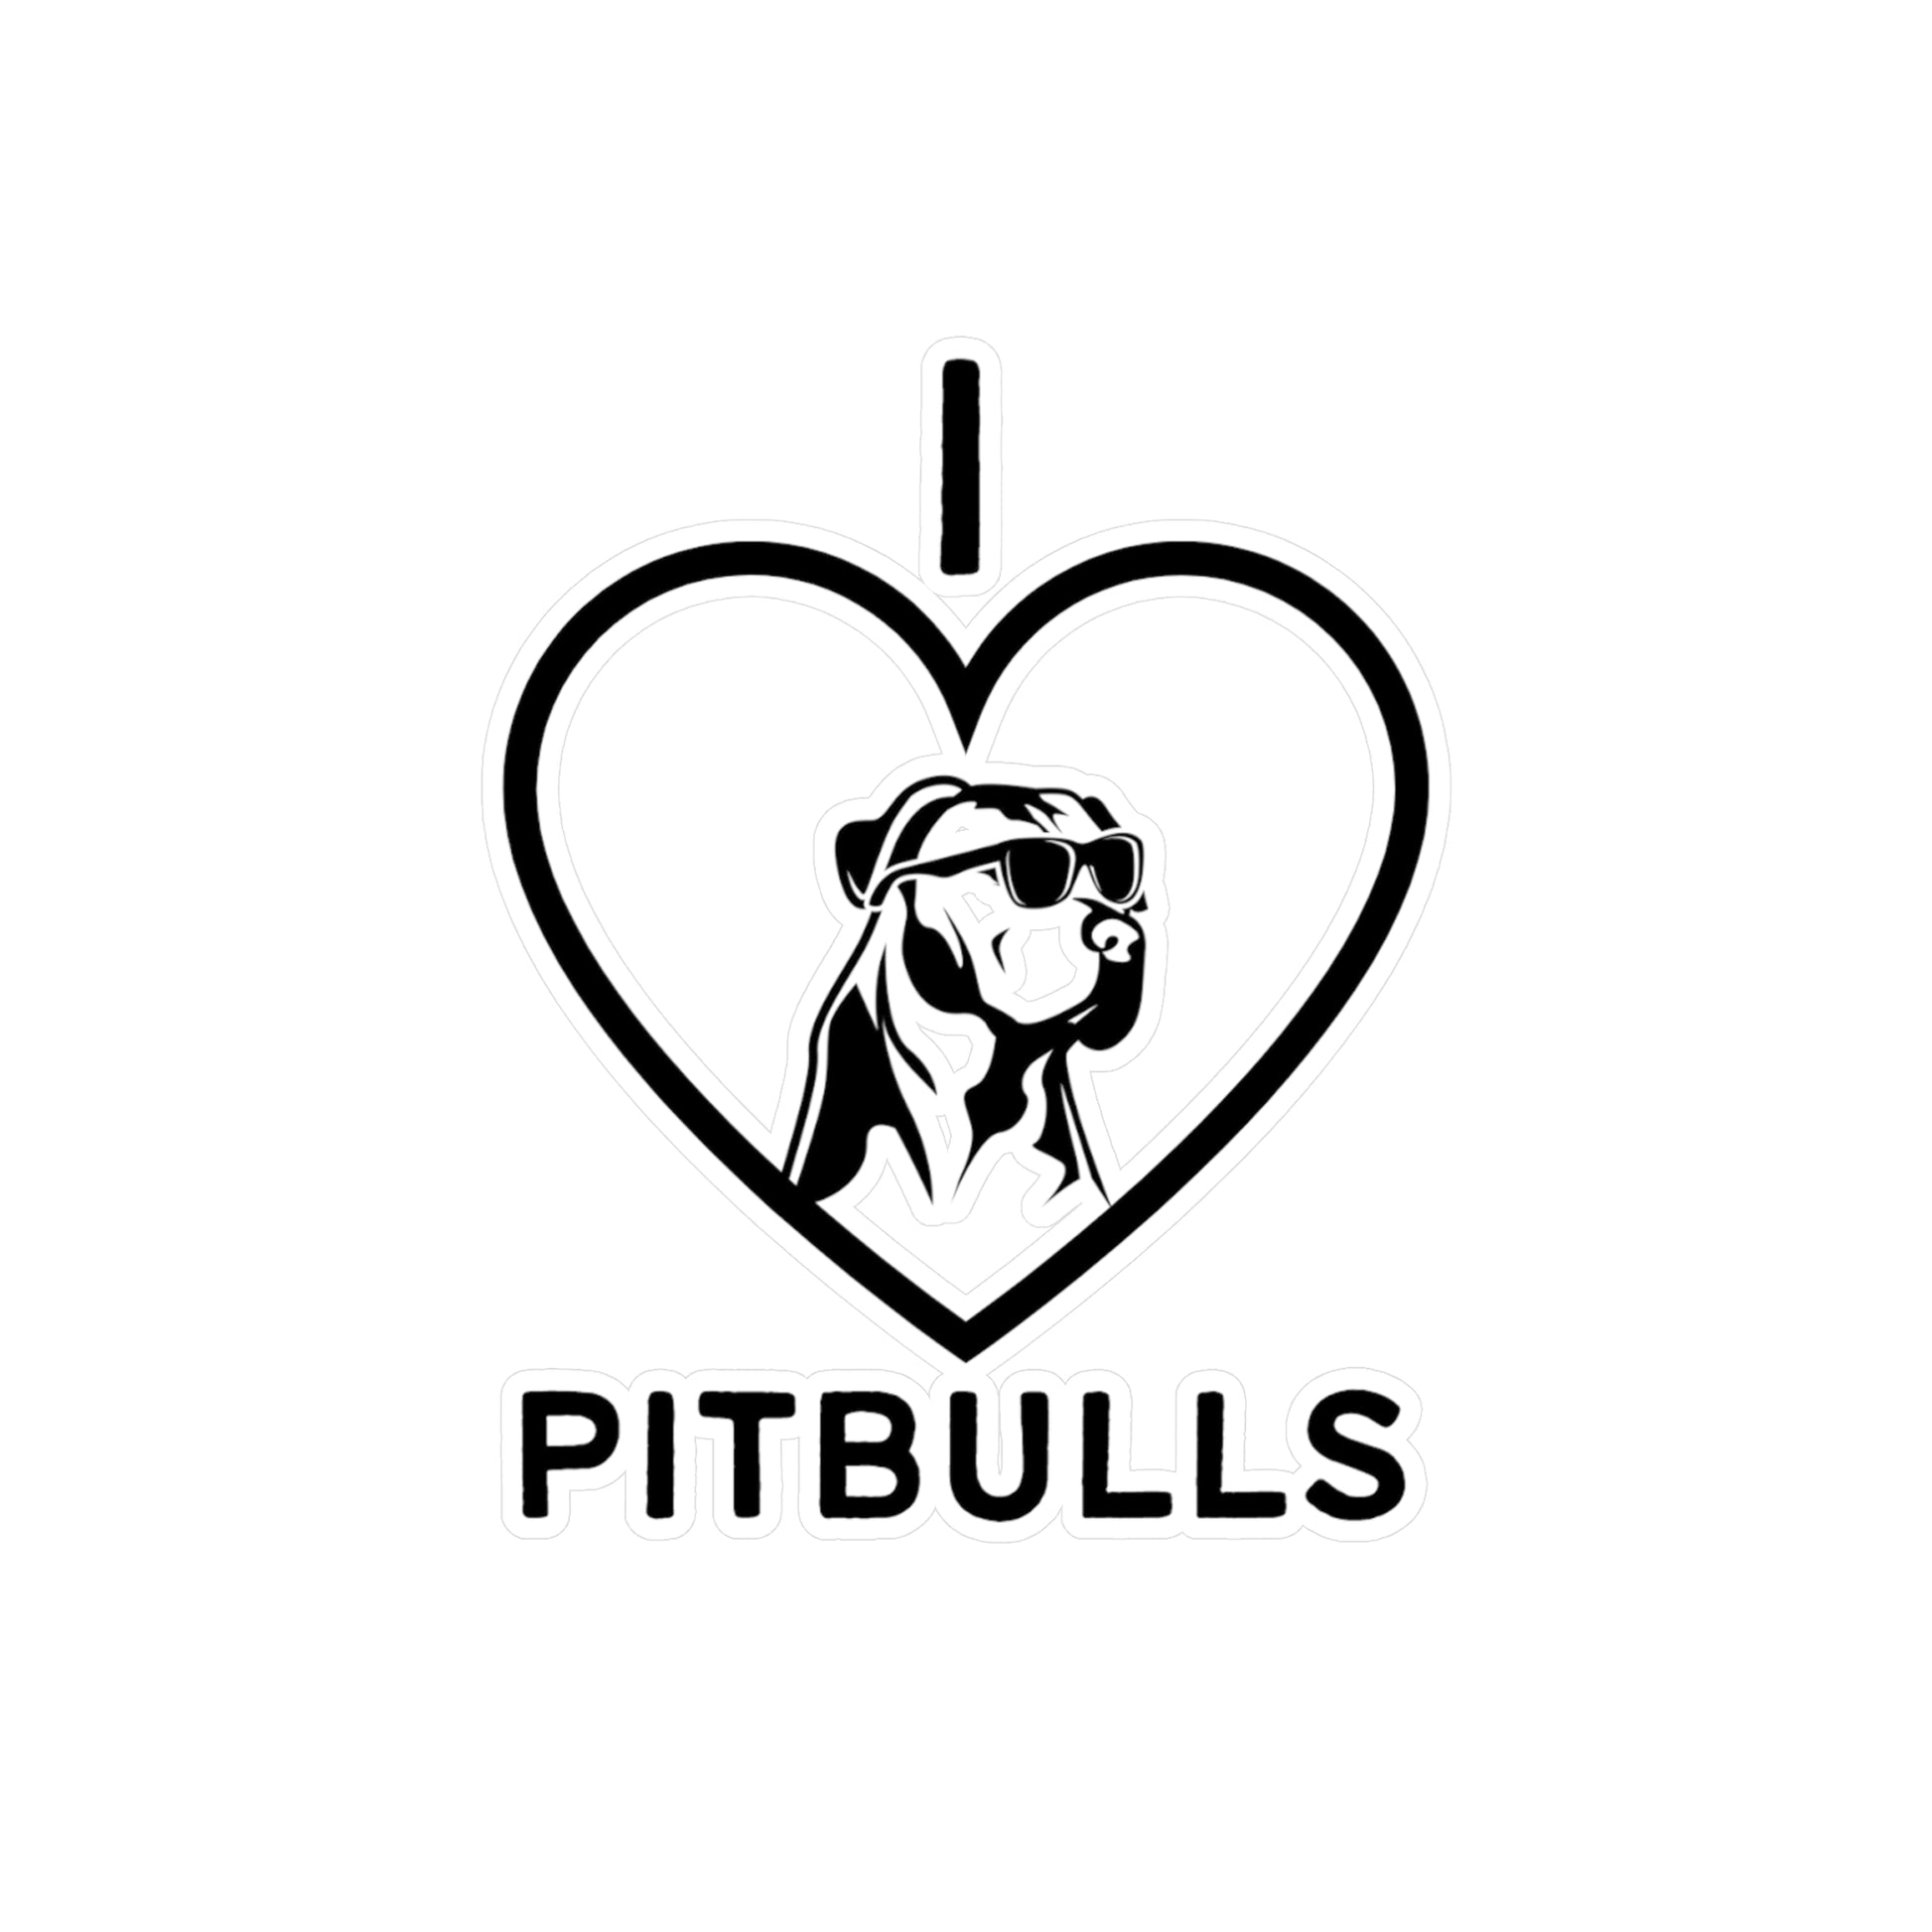 "I Love Pitbulls" Kiss-Cut Vinyl Decals - Weave Got Gifts - Unique Gifts You Won’t Find Anywhere Else!